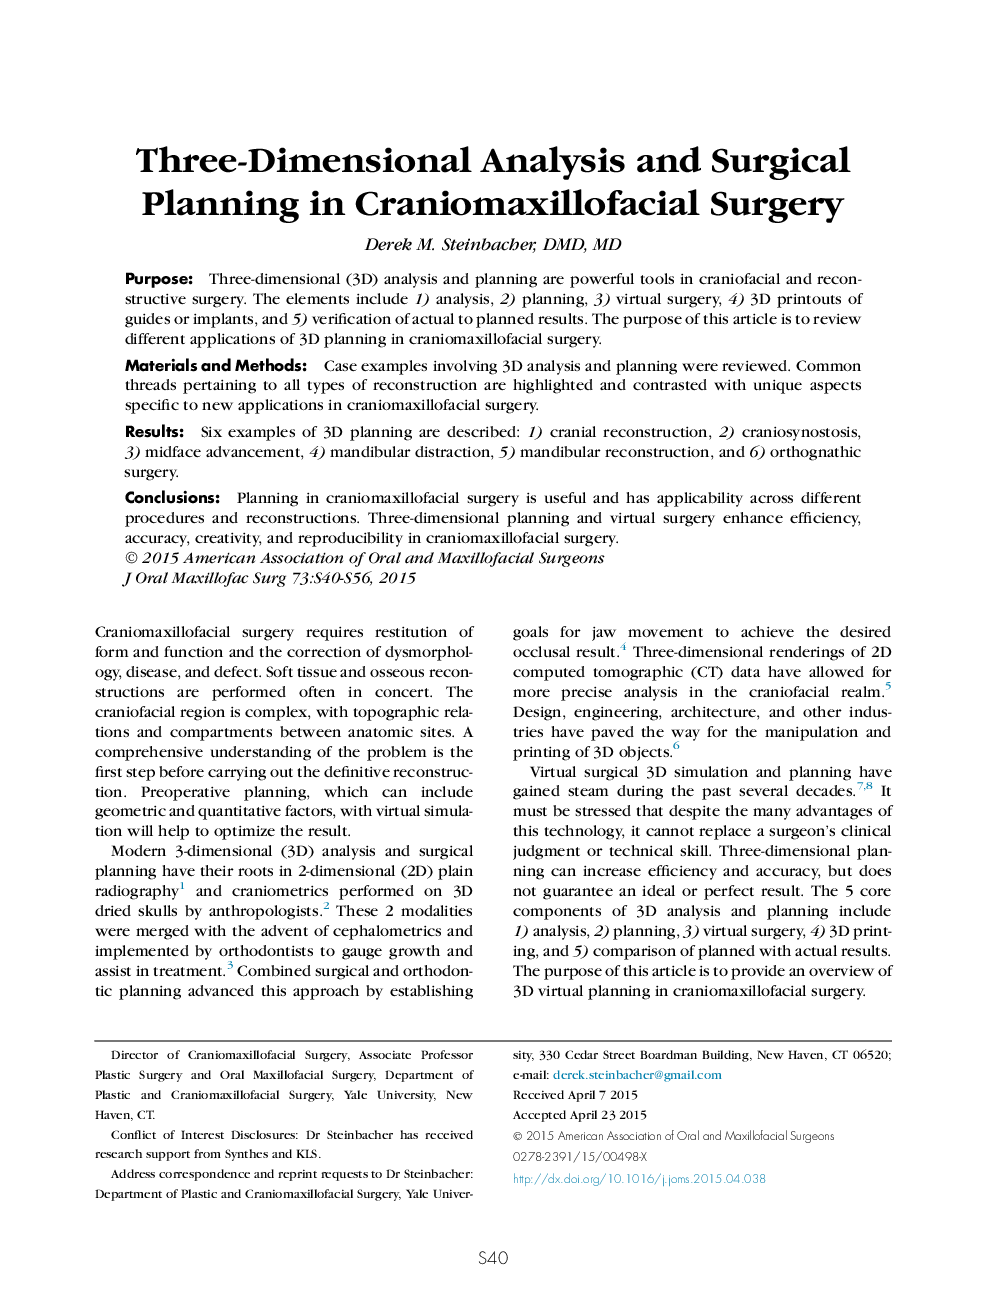 Three-Dimensional Analysis and Surgical Planning in Craniomaxillofacial Surgery 